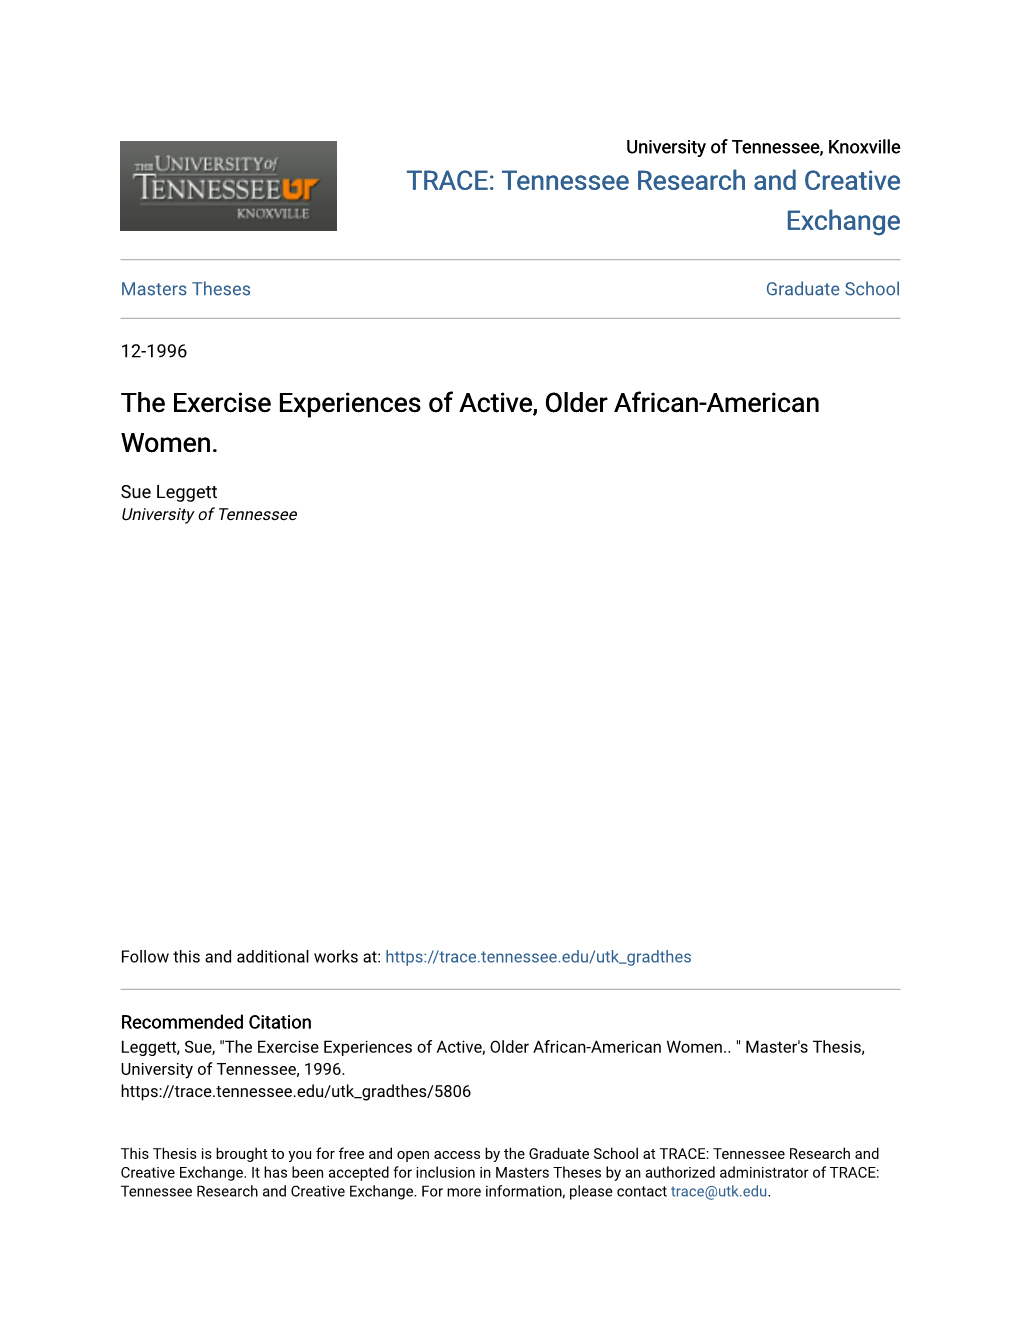 The Exercise Experiences of Active, Older African-American Women